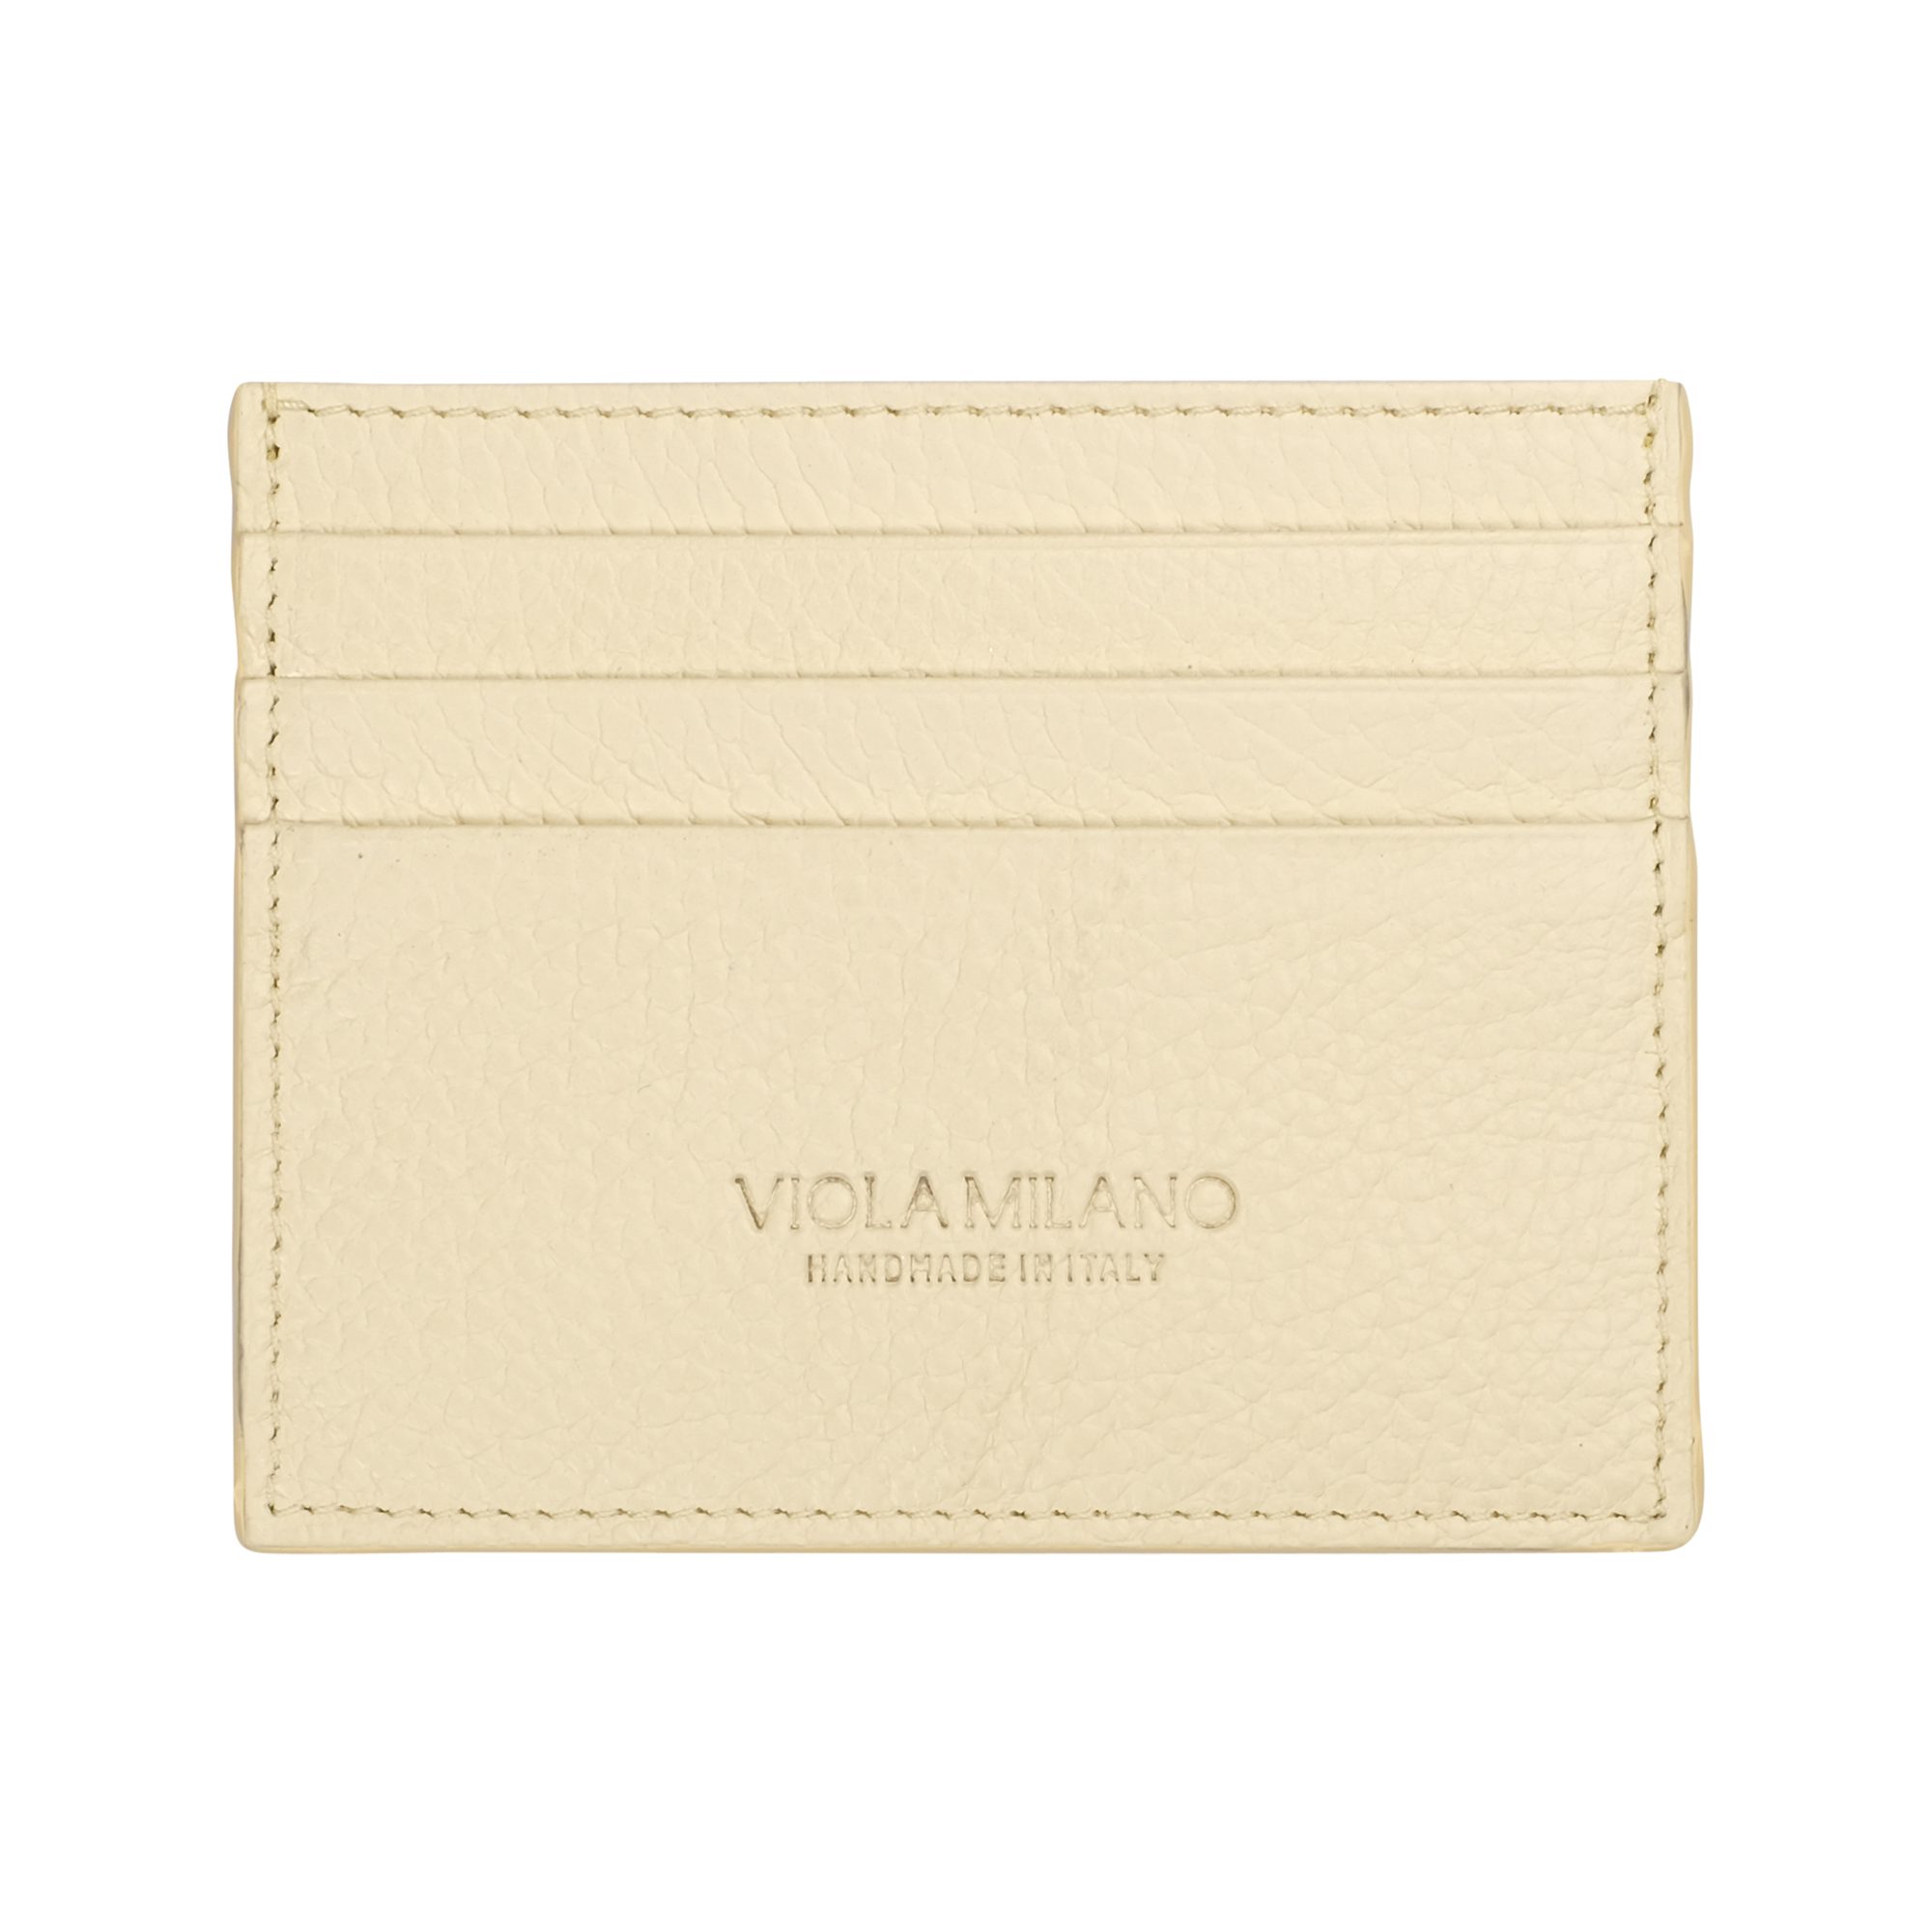 Grain Leather Credit Card Holder - Lime Green • Viola Milano